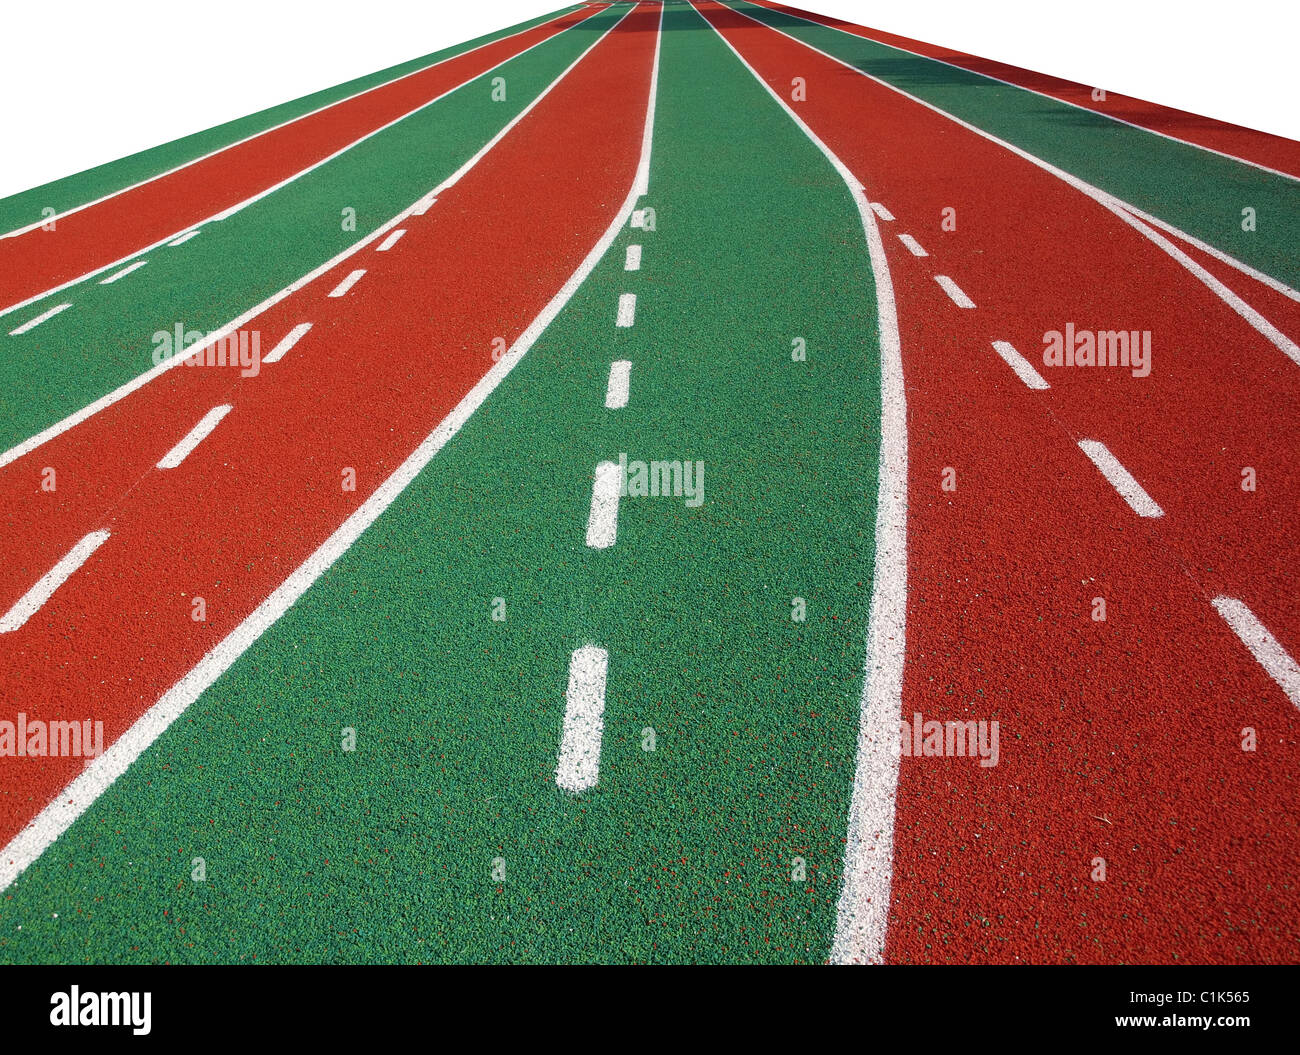 A running track in a stadium with markings in white, red and green Stock Photo